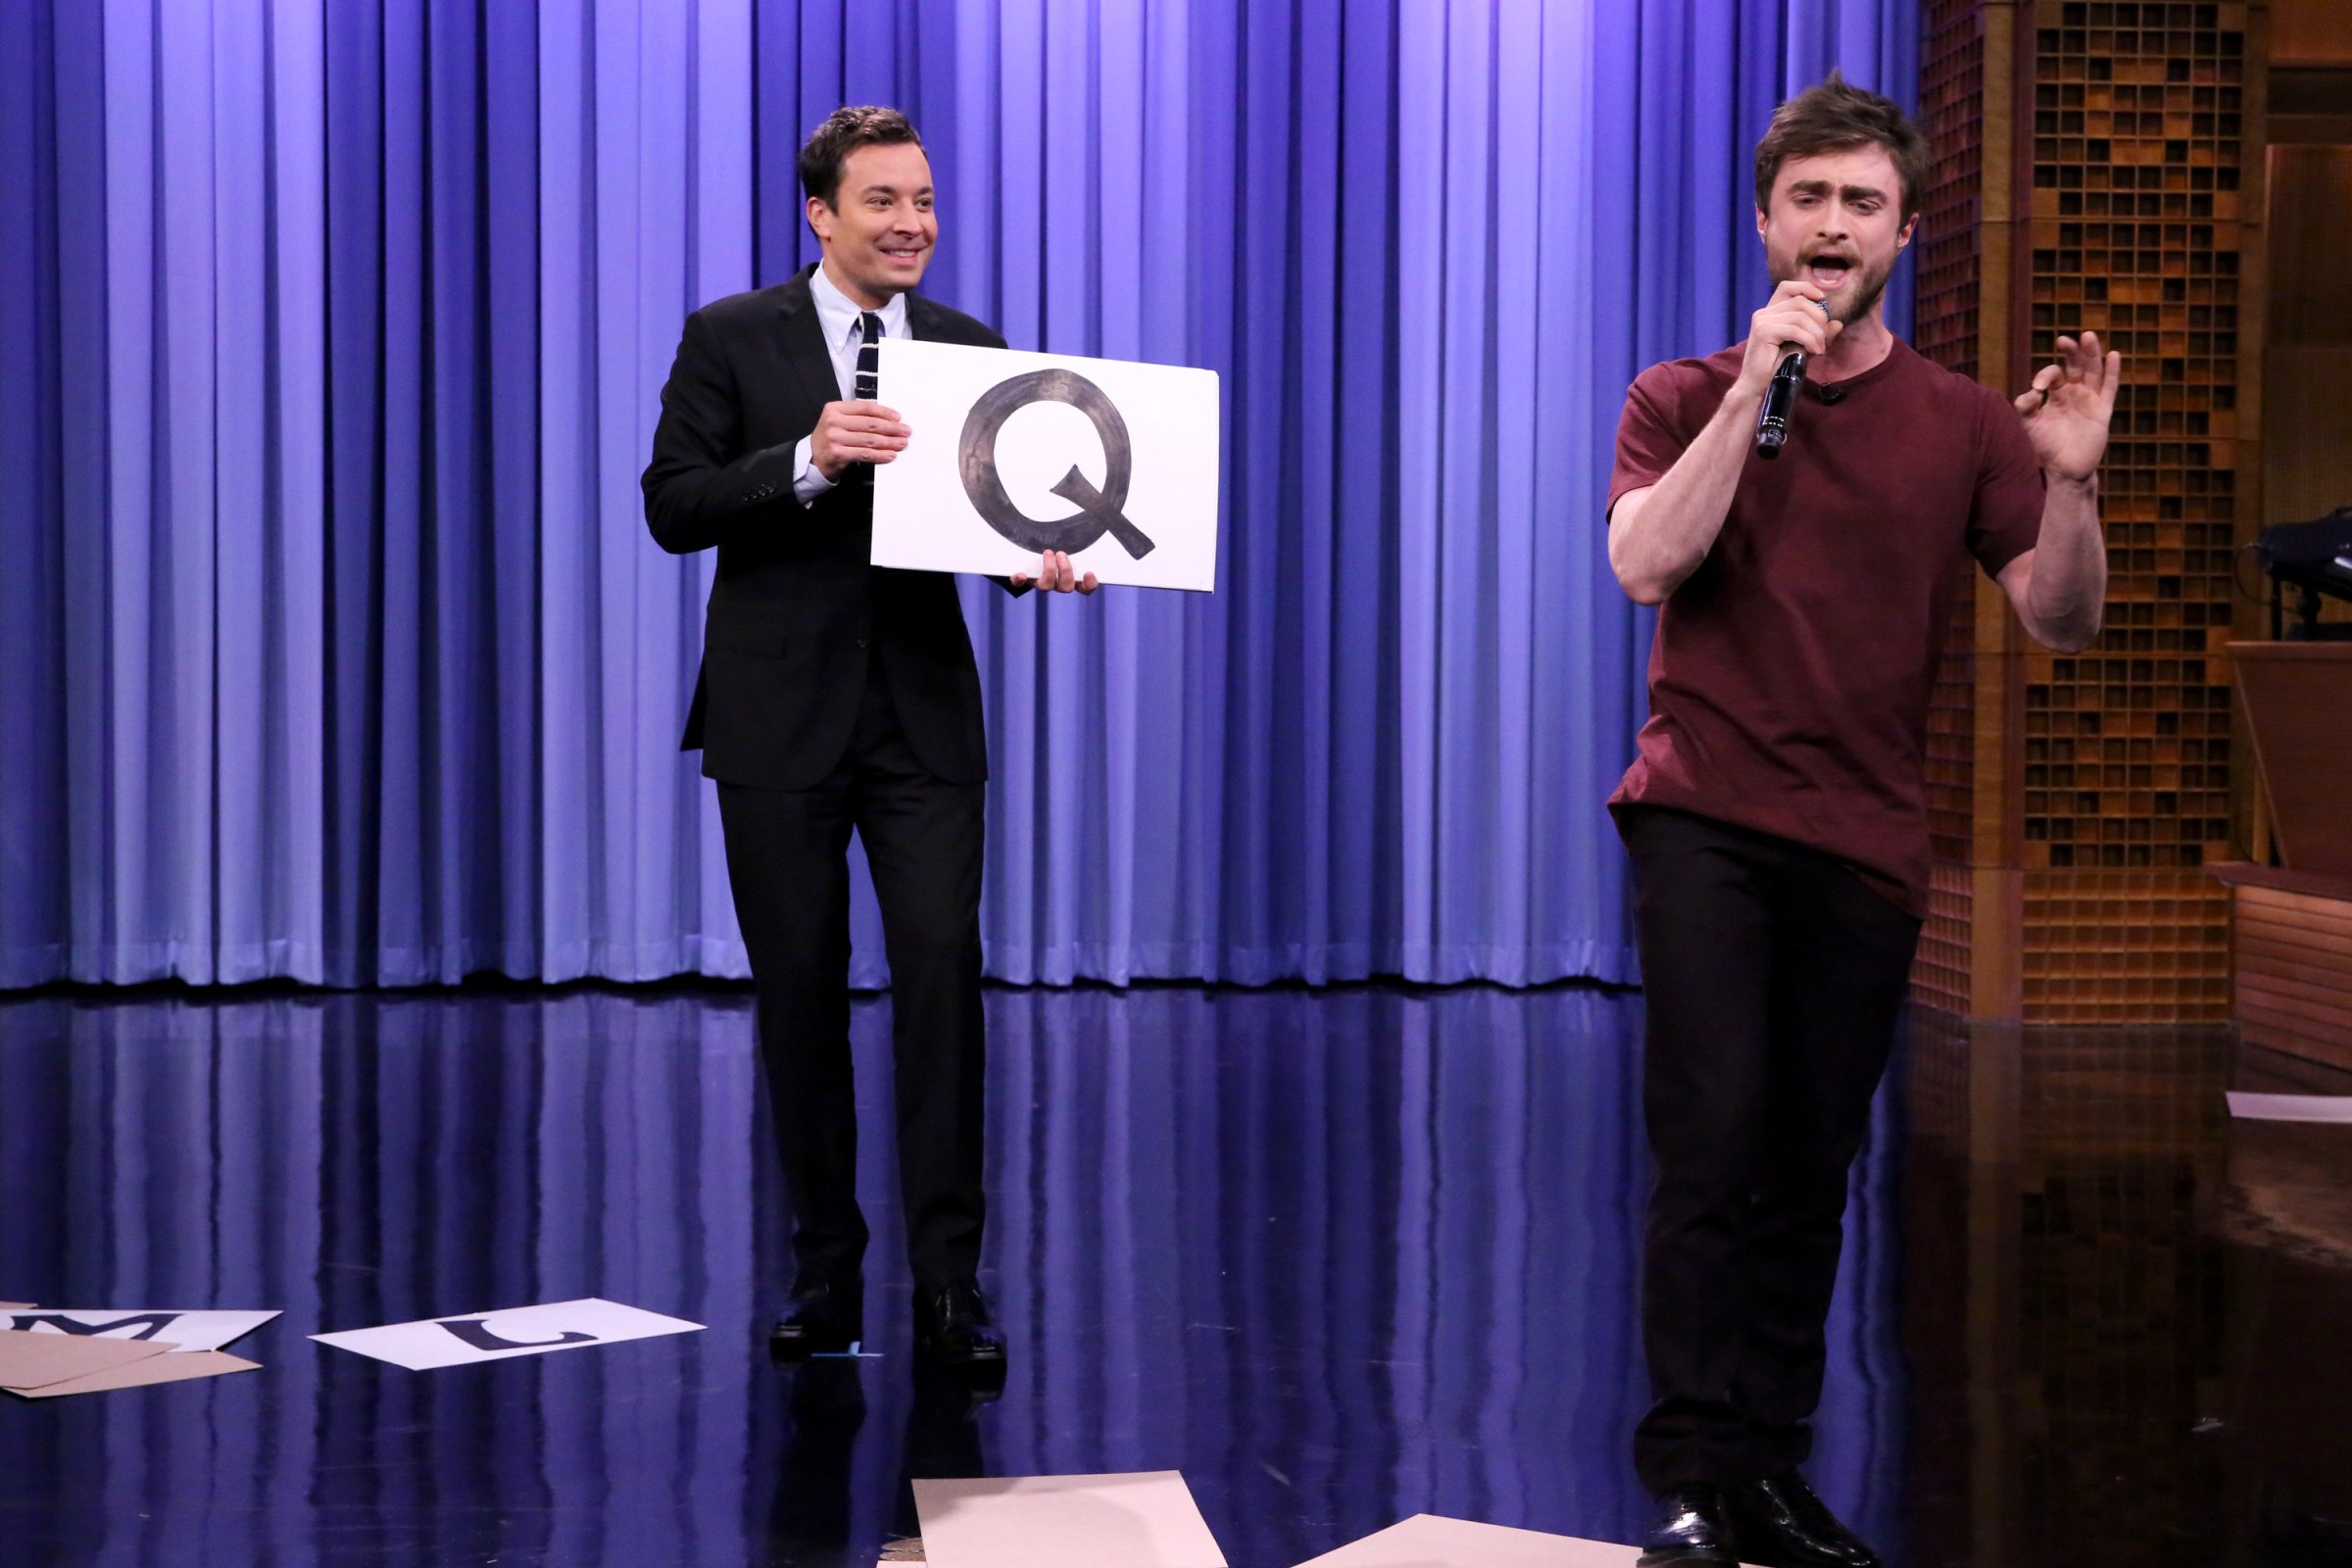 THE TONIGHT SHOW STARRING JIMMY FALLON -- Episode 0150 -- Pictured: (l-r) Host Jimmy Fallon watches as actor Daniel Radcliffe performs the "Alphabet Aerobics" rap by Blackalicious on October 28, 2014 -- (Photo by: Douglas Gorenstein/NBC/NBCU Photo Bank)